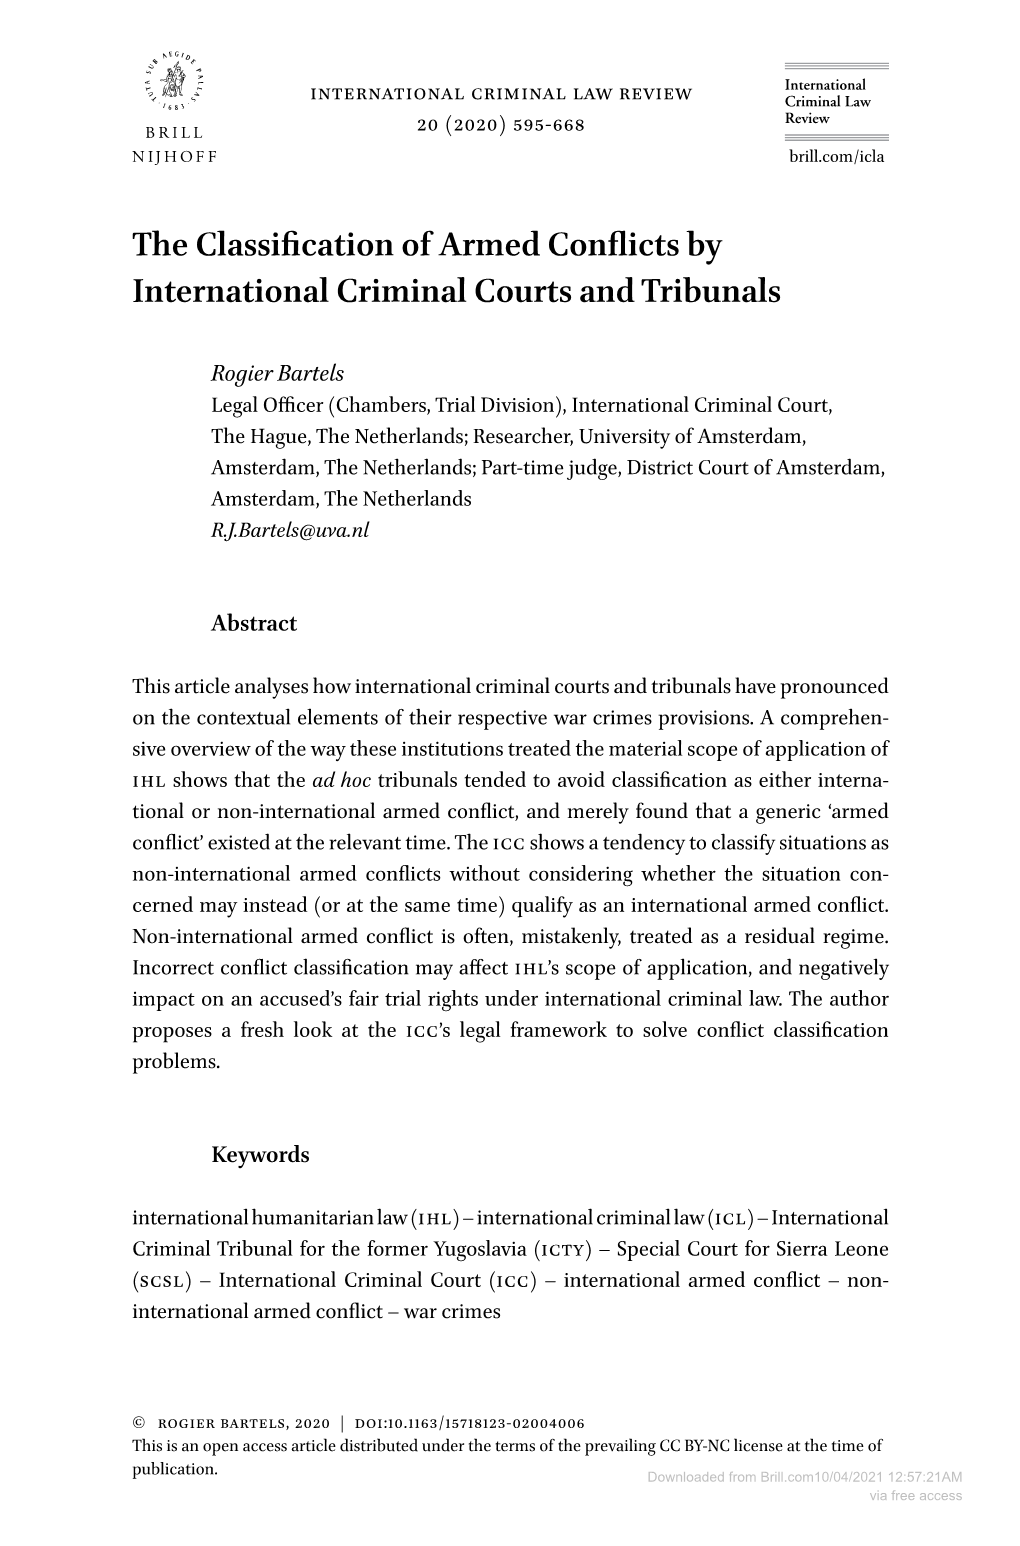 The Classification of Armed Conflicts by International Criminal Courts and Tribunals